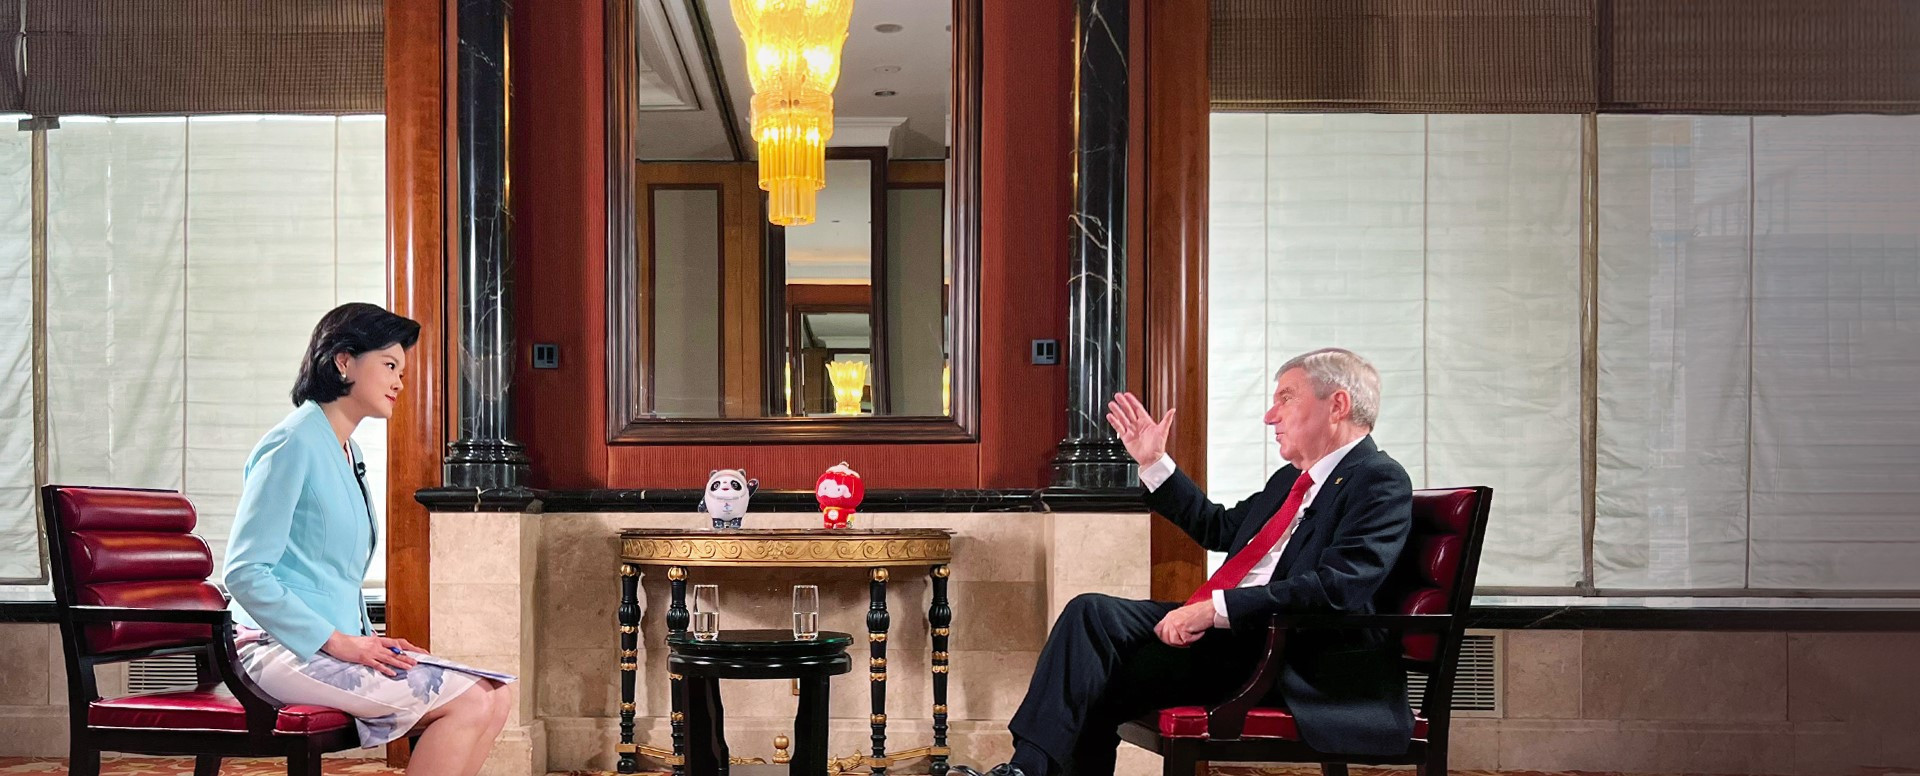 IOC President Thomas Bach told the China Media Group that he had first met Chinese President Xi Jinping during the build up to Beijing 2008 and admired his 